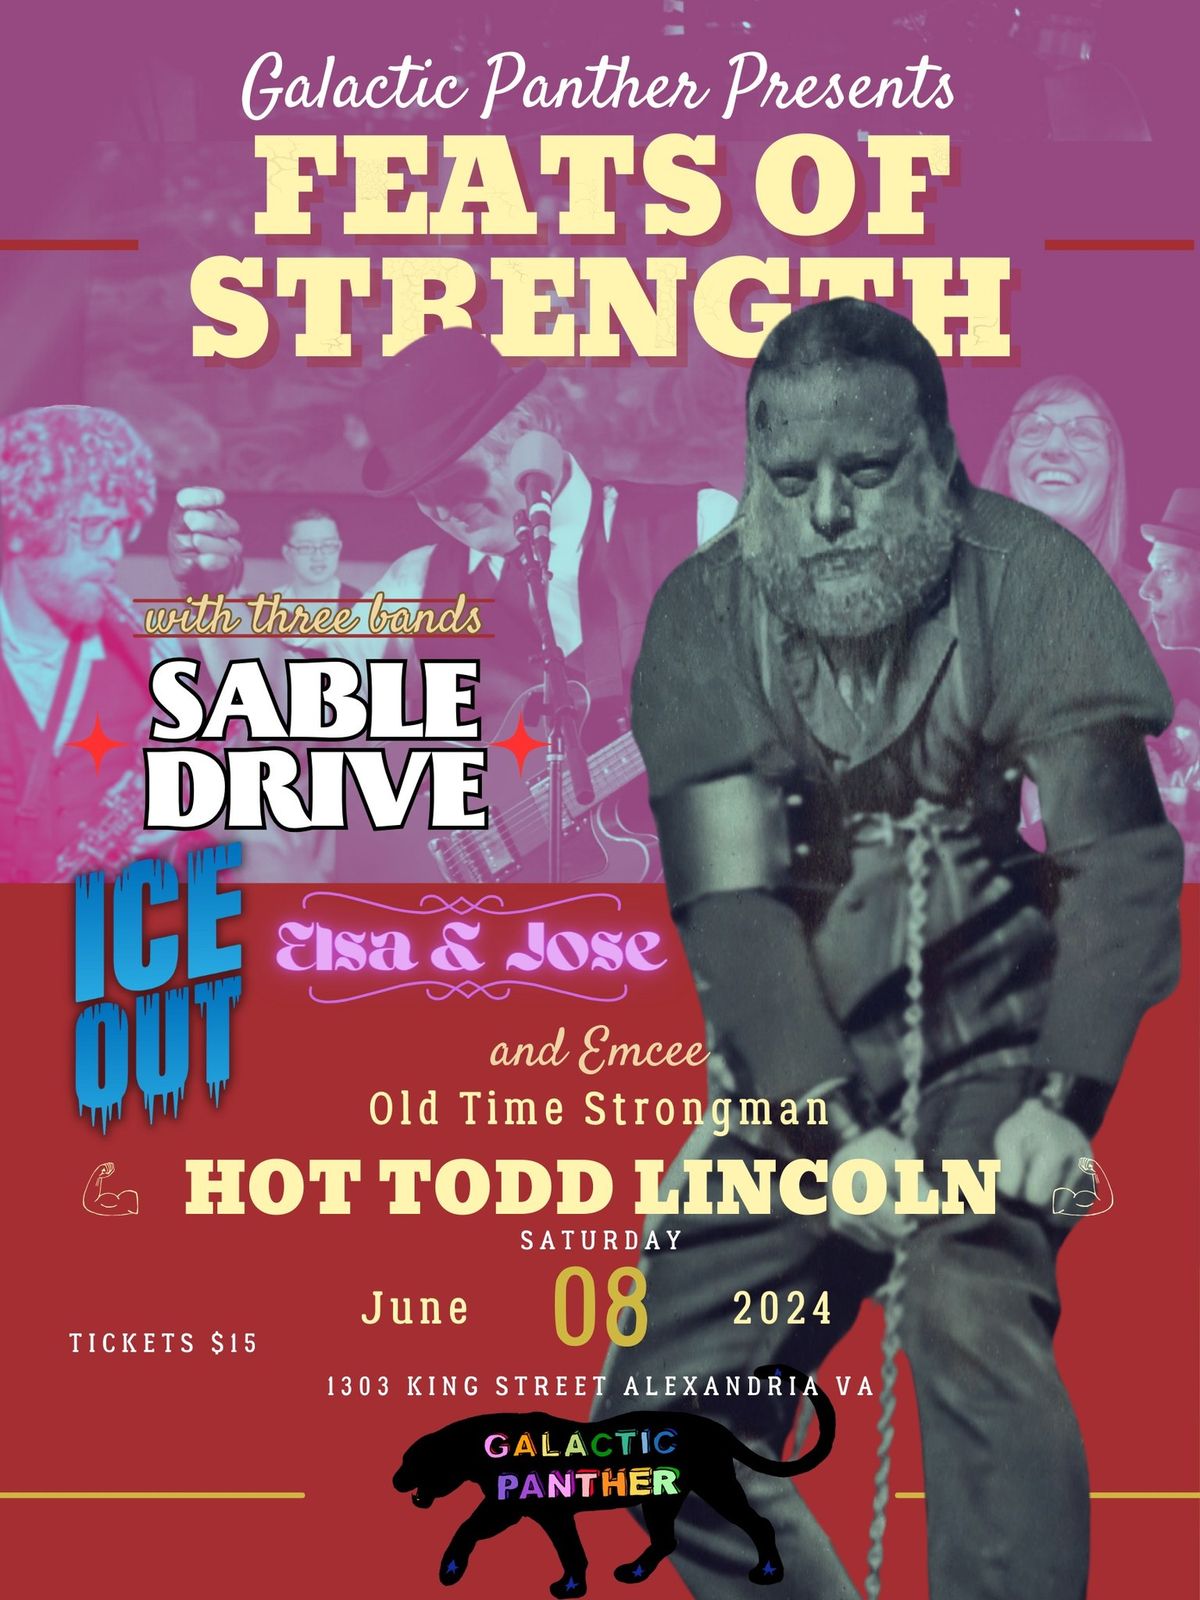 Sable Drive with Emcee Old Time Strongman Hot Todd Lincoln, Ice Out and Elsa and Jose